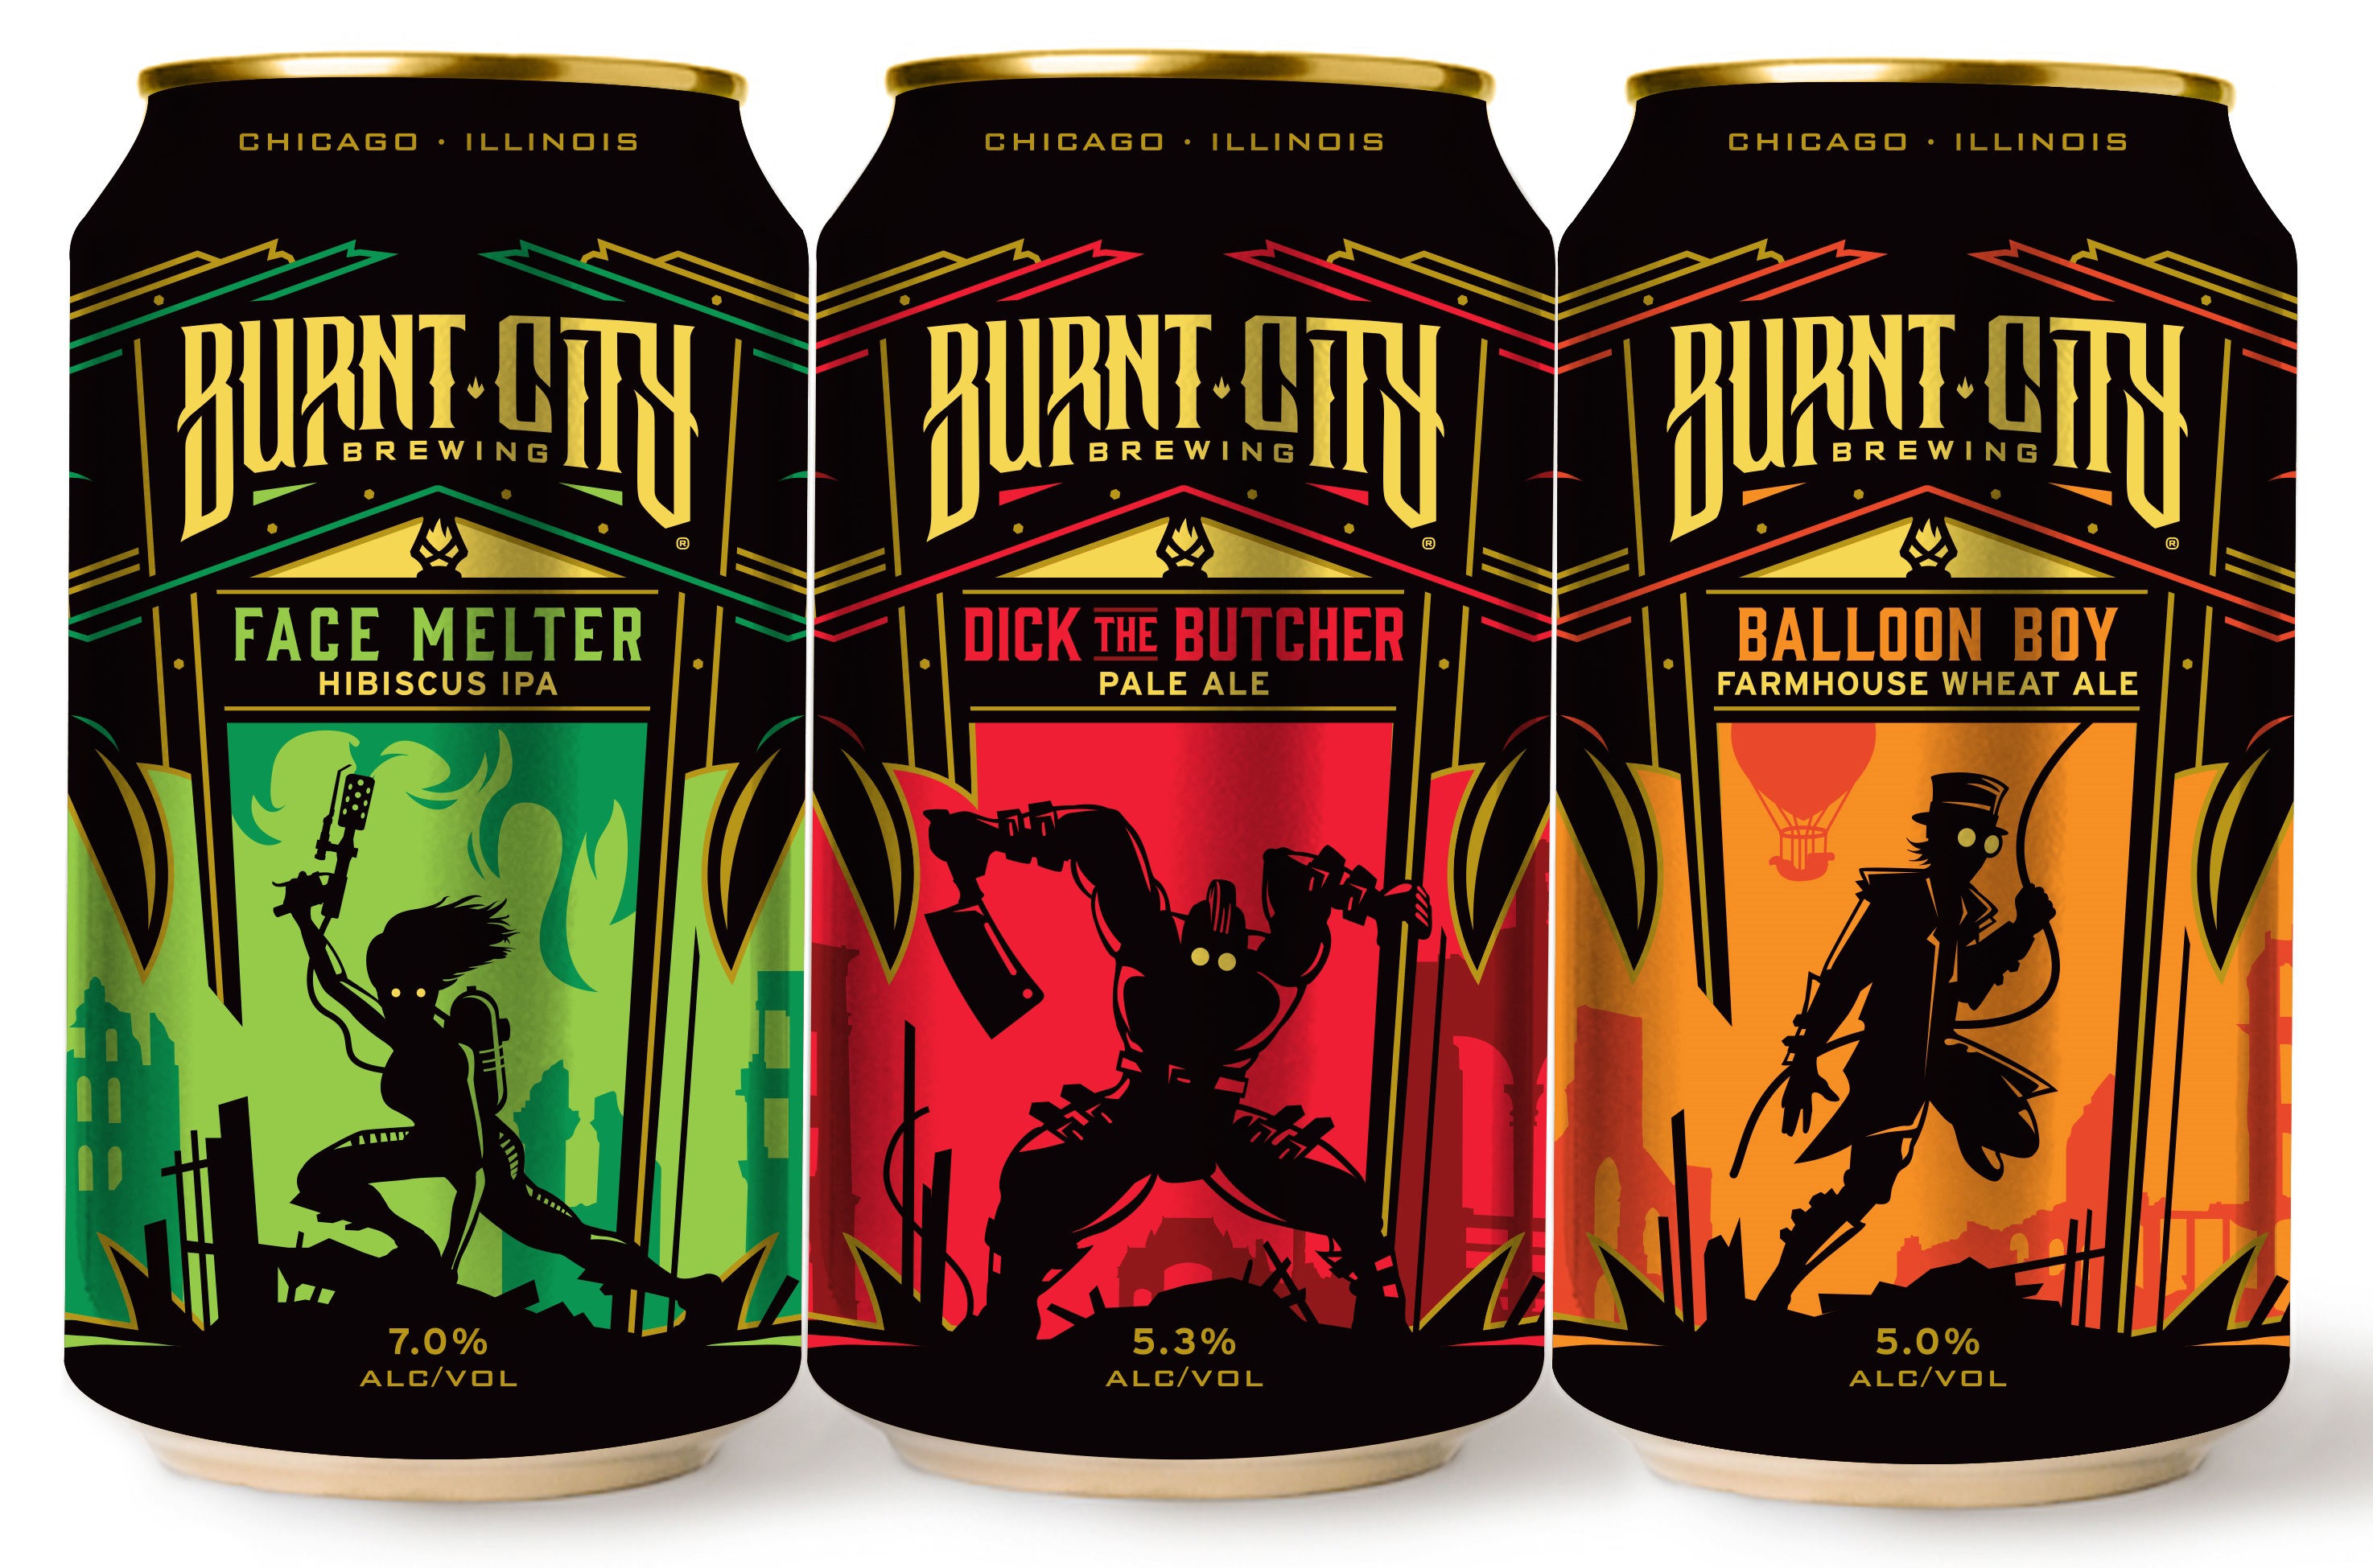 Burnt City Brewing Cans